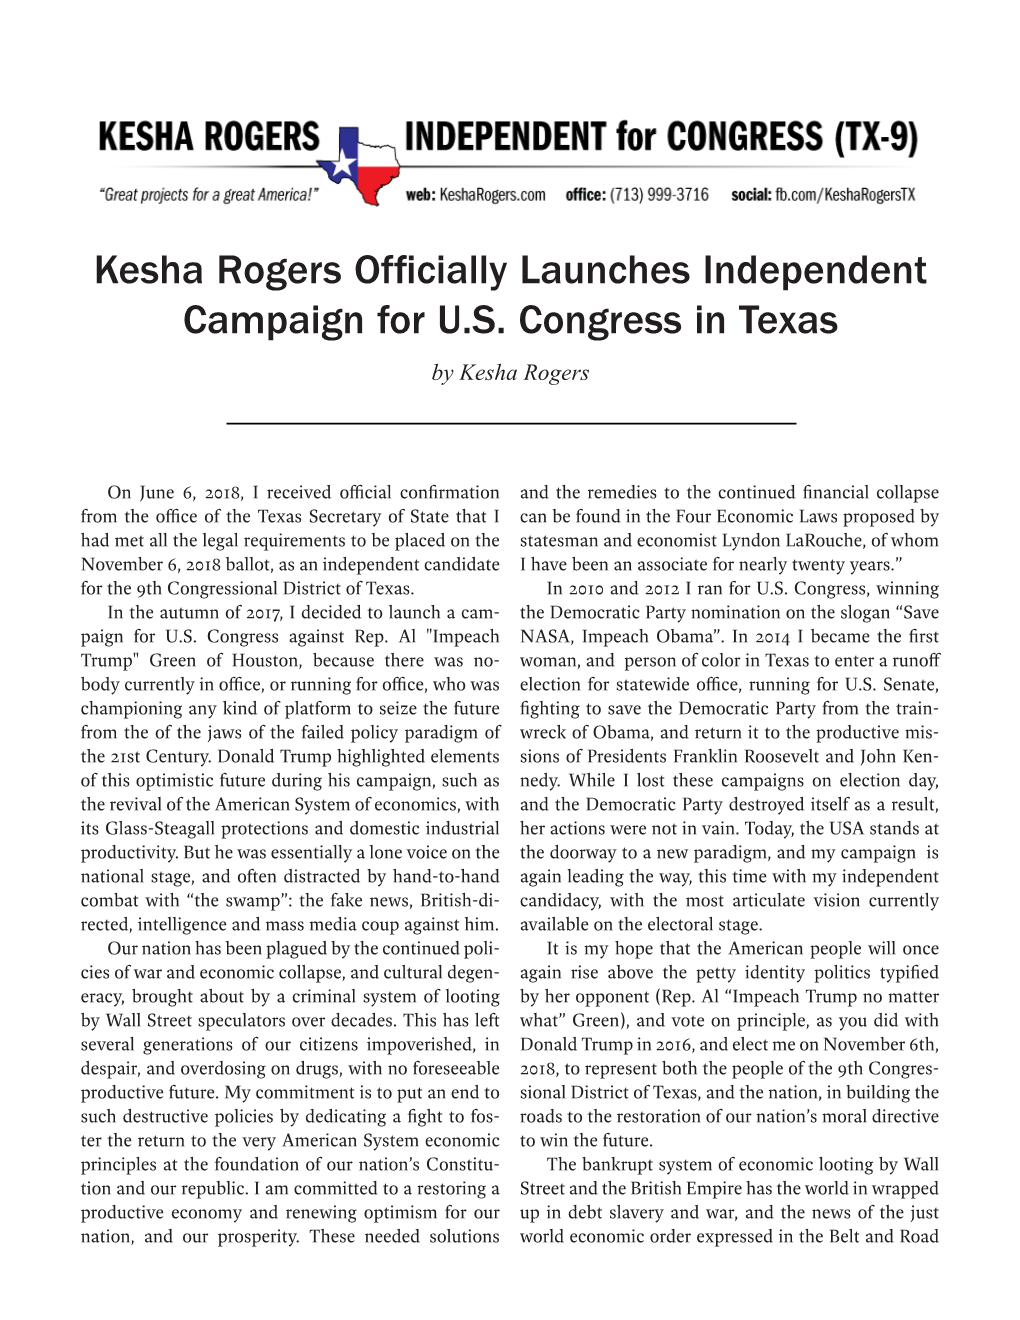 Kesha Rogers Officially Launches Independent Campaign for U.S. Congress in Texas by Kesha Rogers